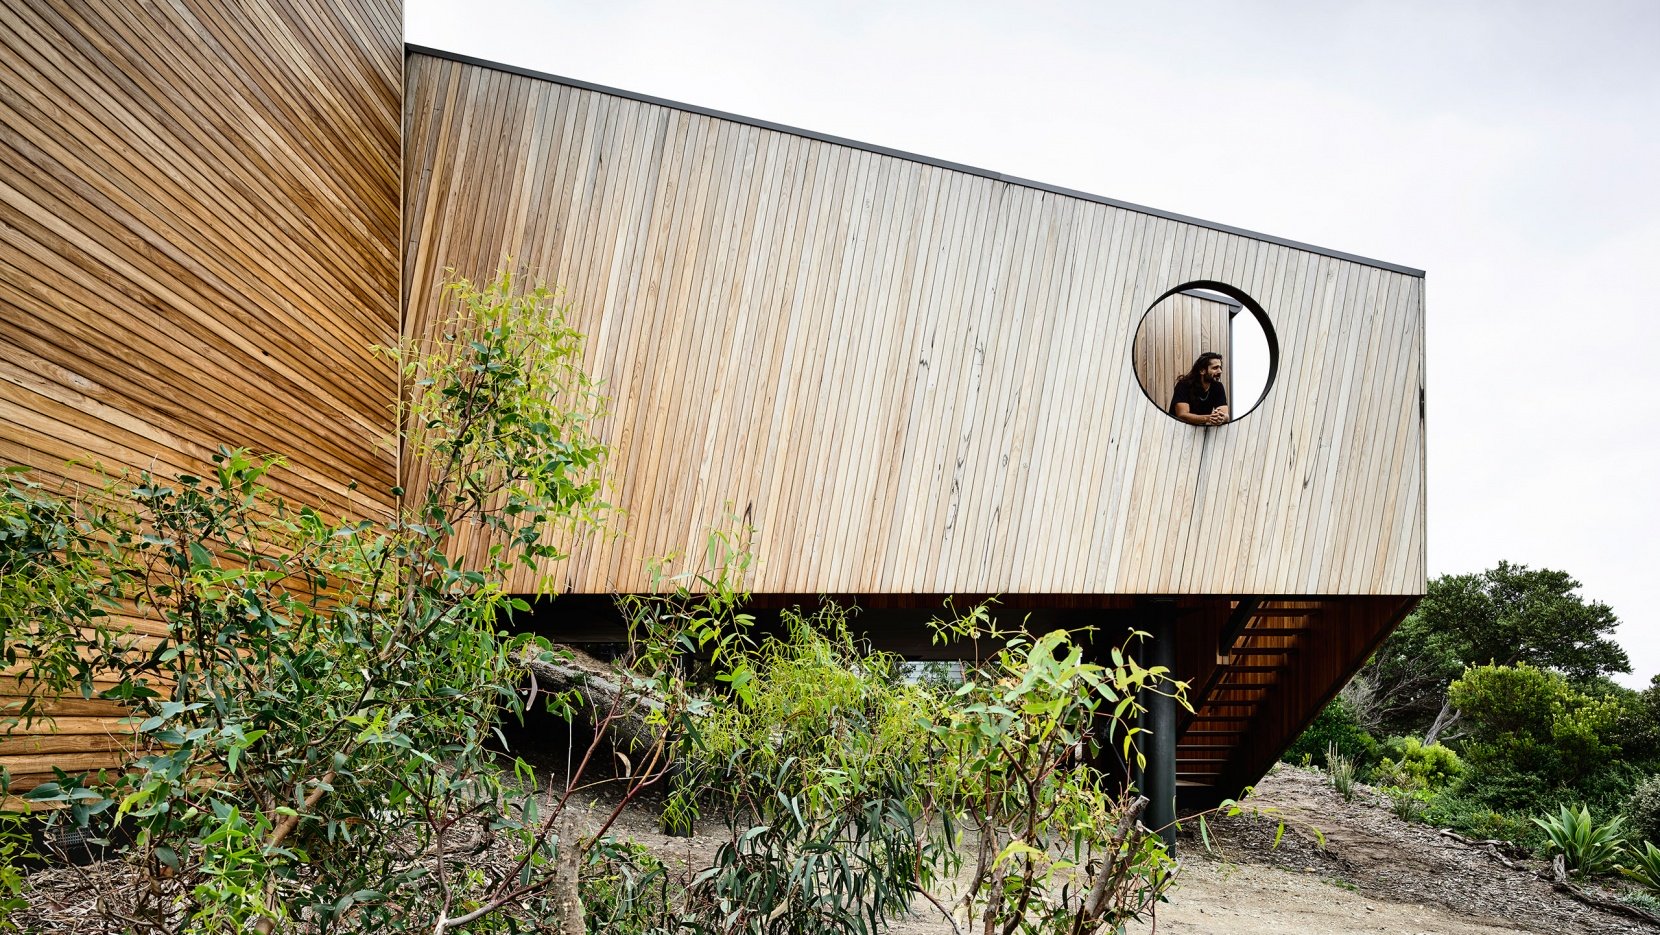 This unique home is a coastal dwelling in Australia and it features a Nordic feel